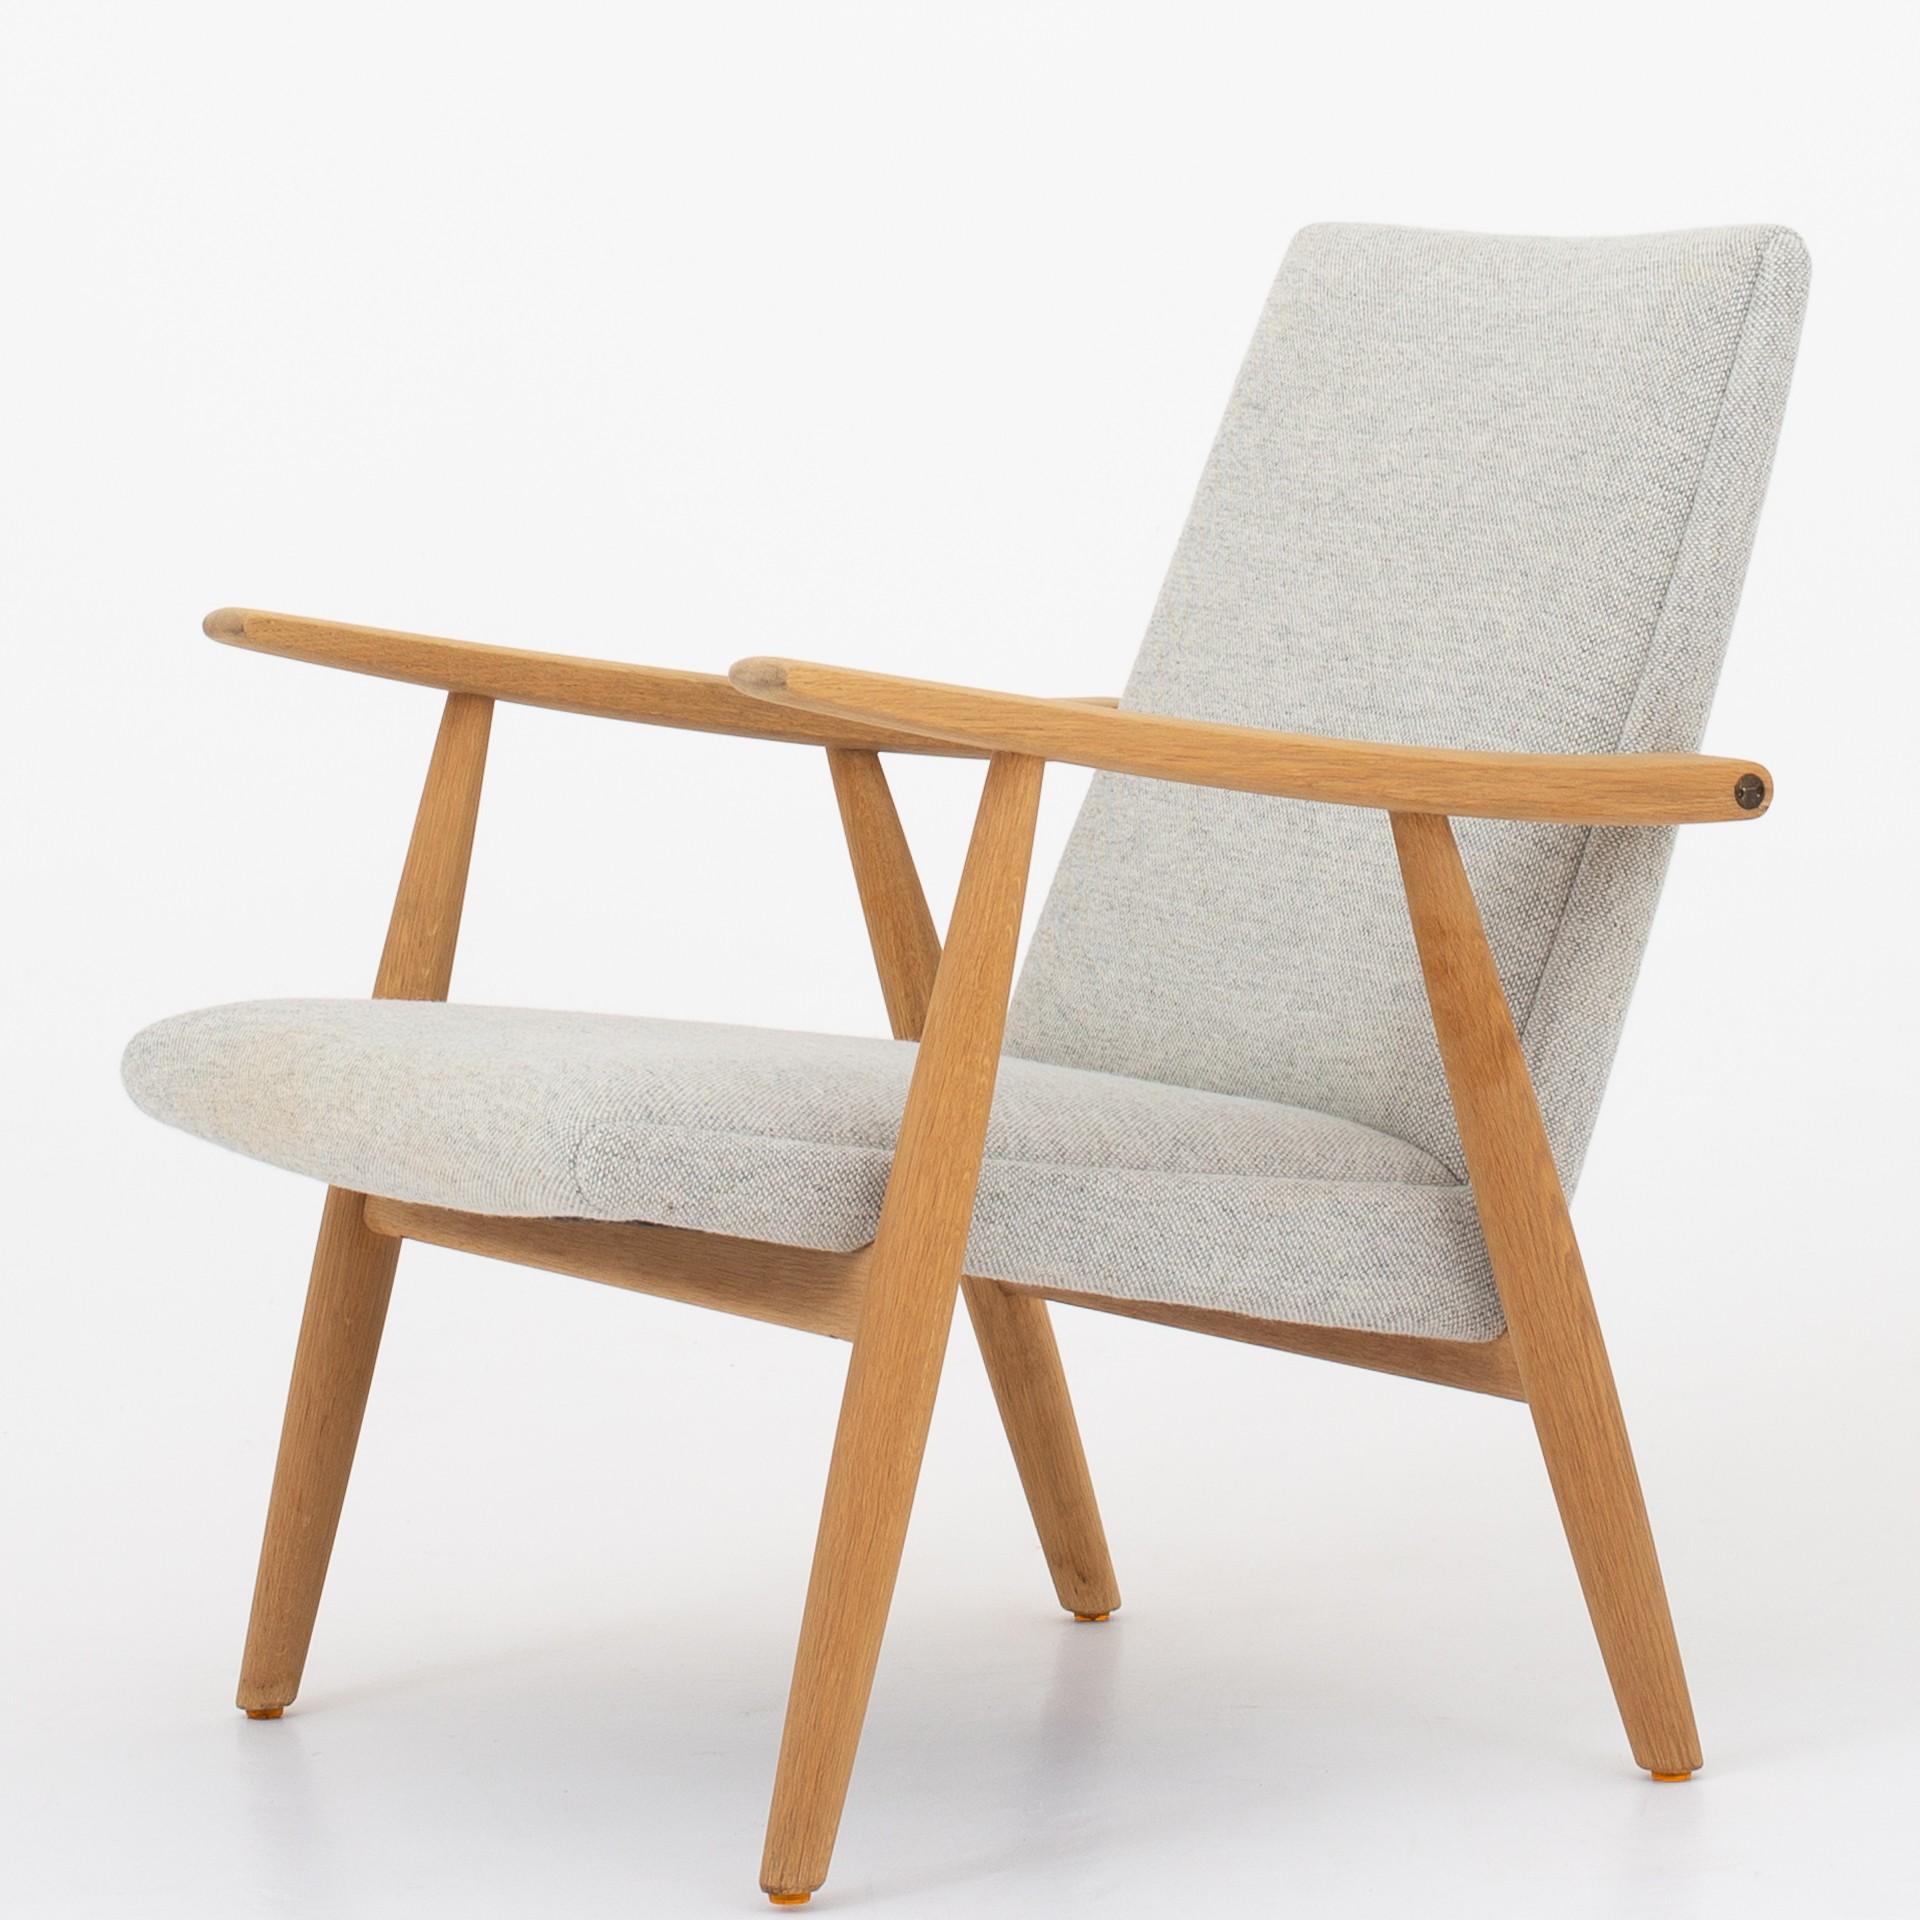 Set of two easy chairs GE 260 in oak. Reupholstered with Hallingdal 65 / 110. More pieces in stock. Maker GETAMA.